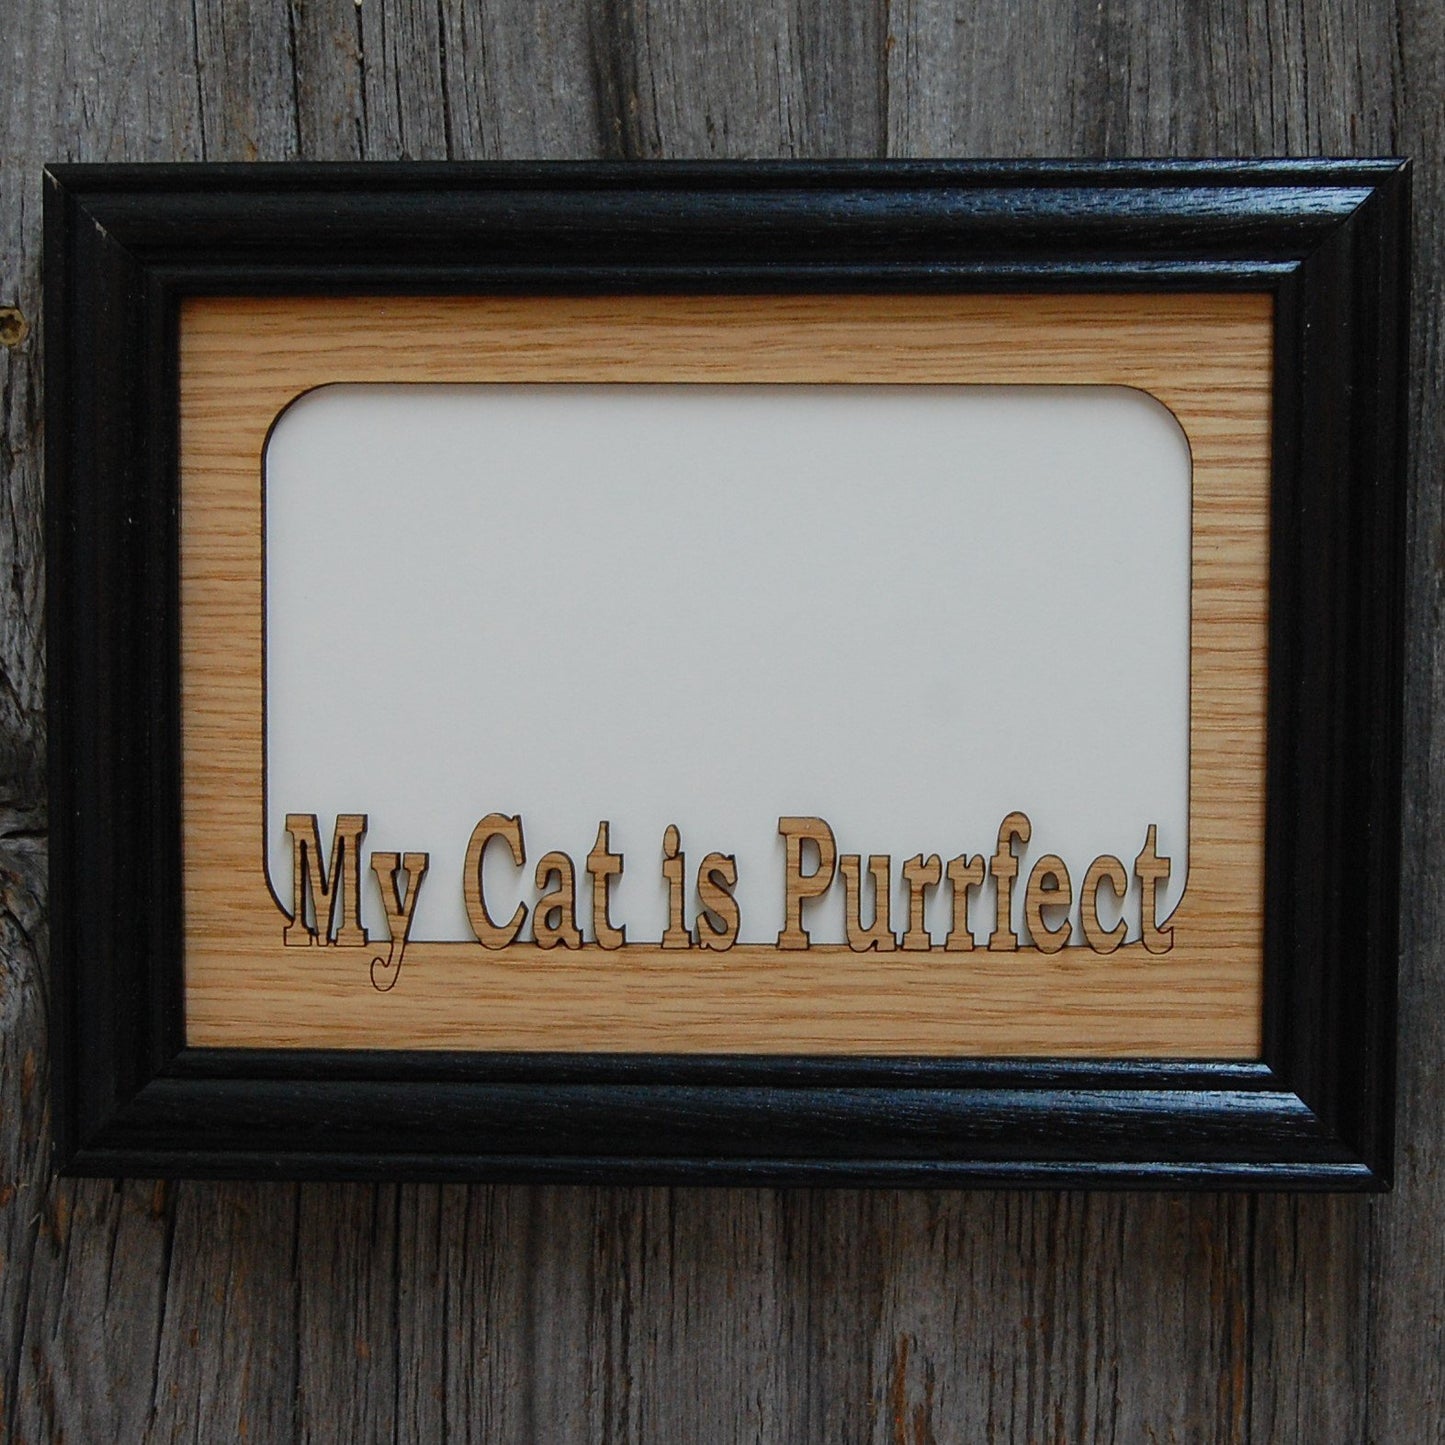 5x7 My Cat is Purrfect Picture Frame, Picture Frame, home decor, laser engraved - Legacy Images